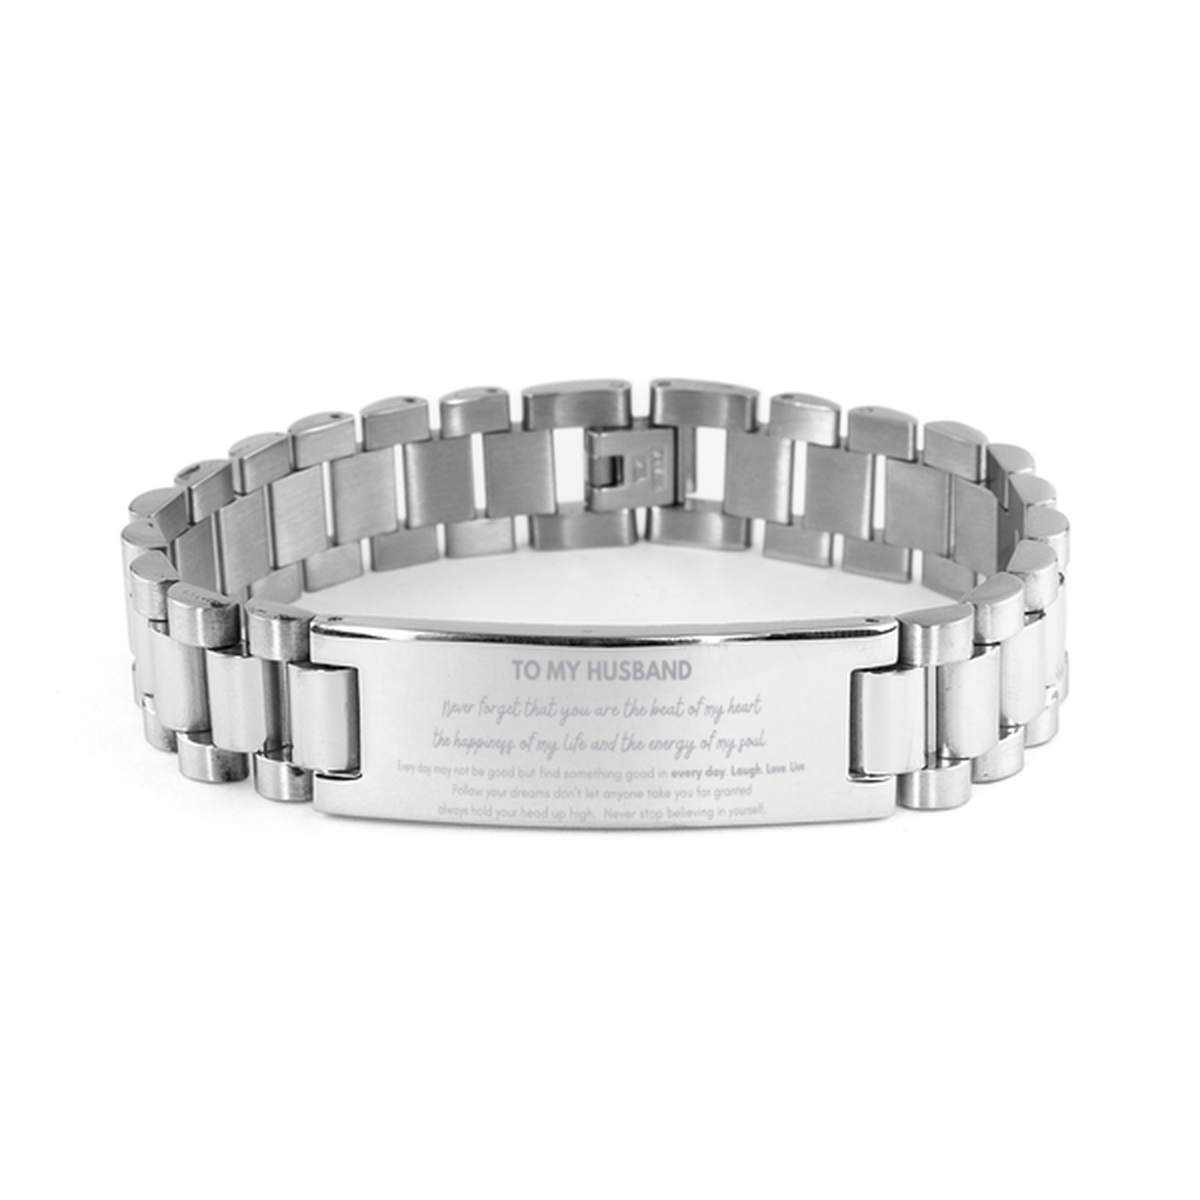 To My Husband Bracelet Gifts, Christmas Husband Ladder Stainless Steel Bracelet Present, Birthday Unique Motivational For Husband, To My Husband Never forget that you are the beat of my heart the happiness of my life and the energy of my soul